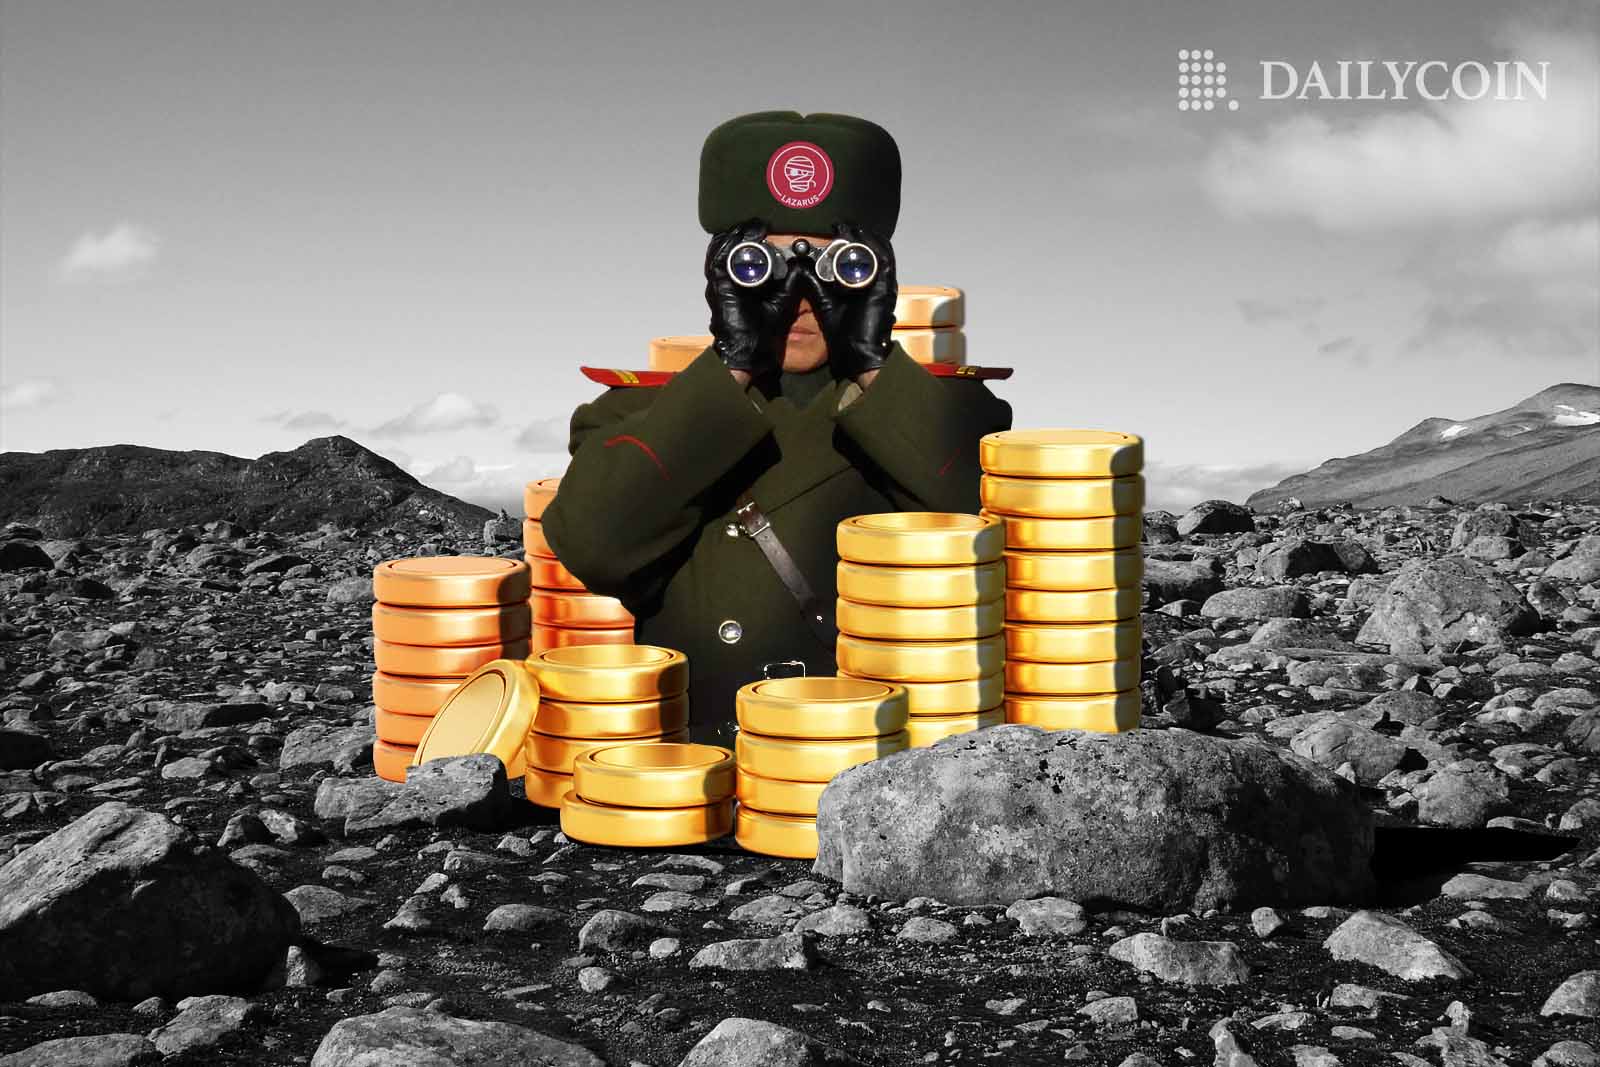 A North Korean soldier in a uniform looking through binoculars with stacks of coins around him.